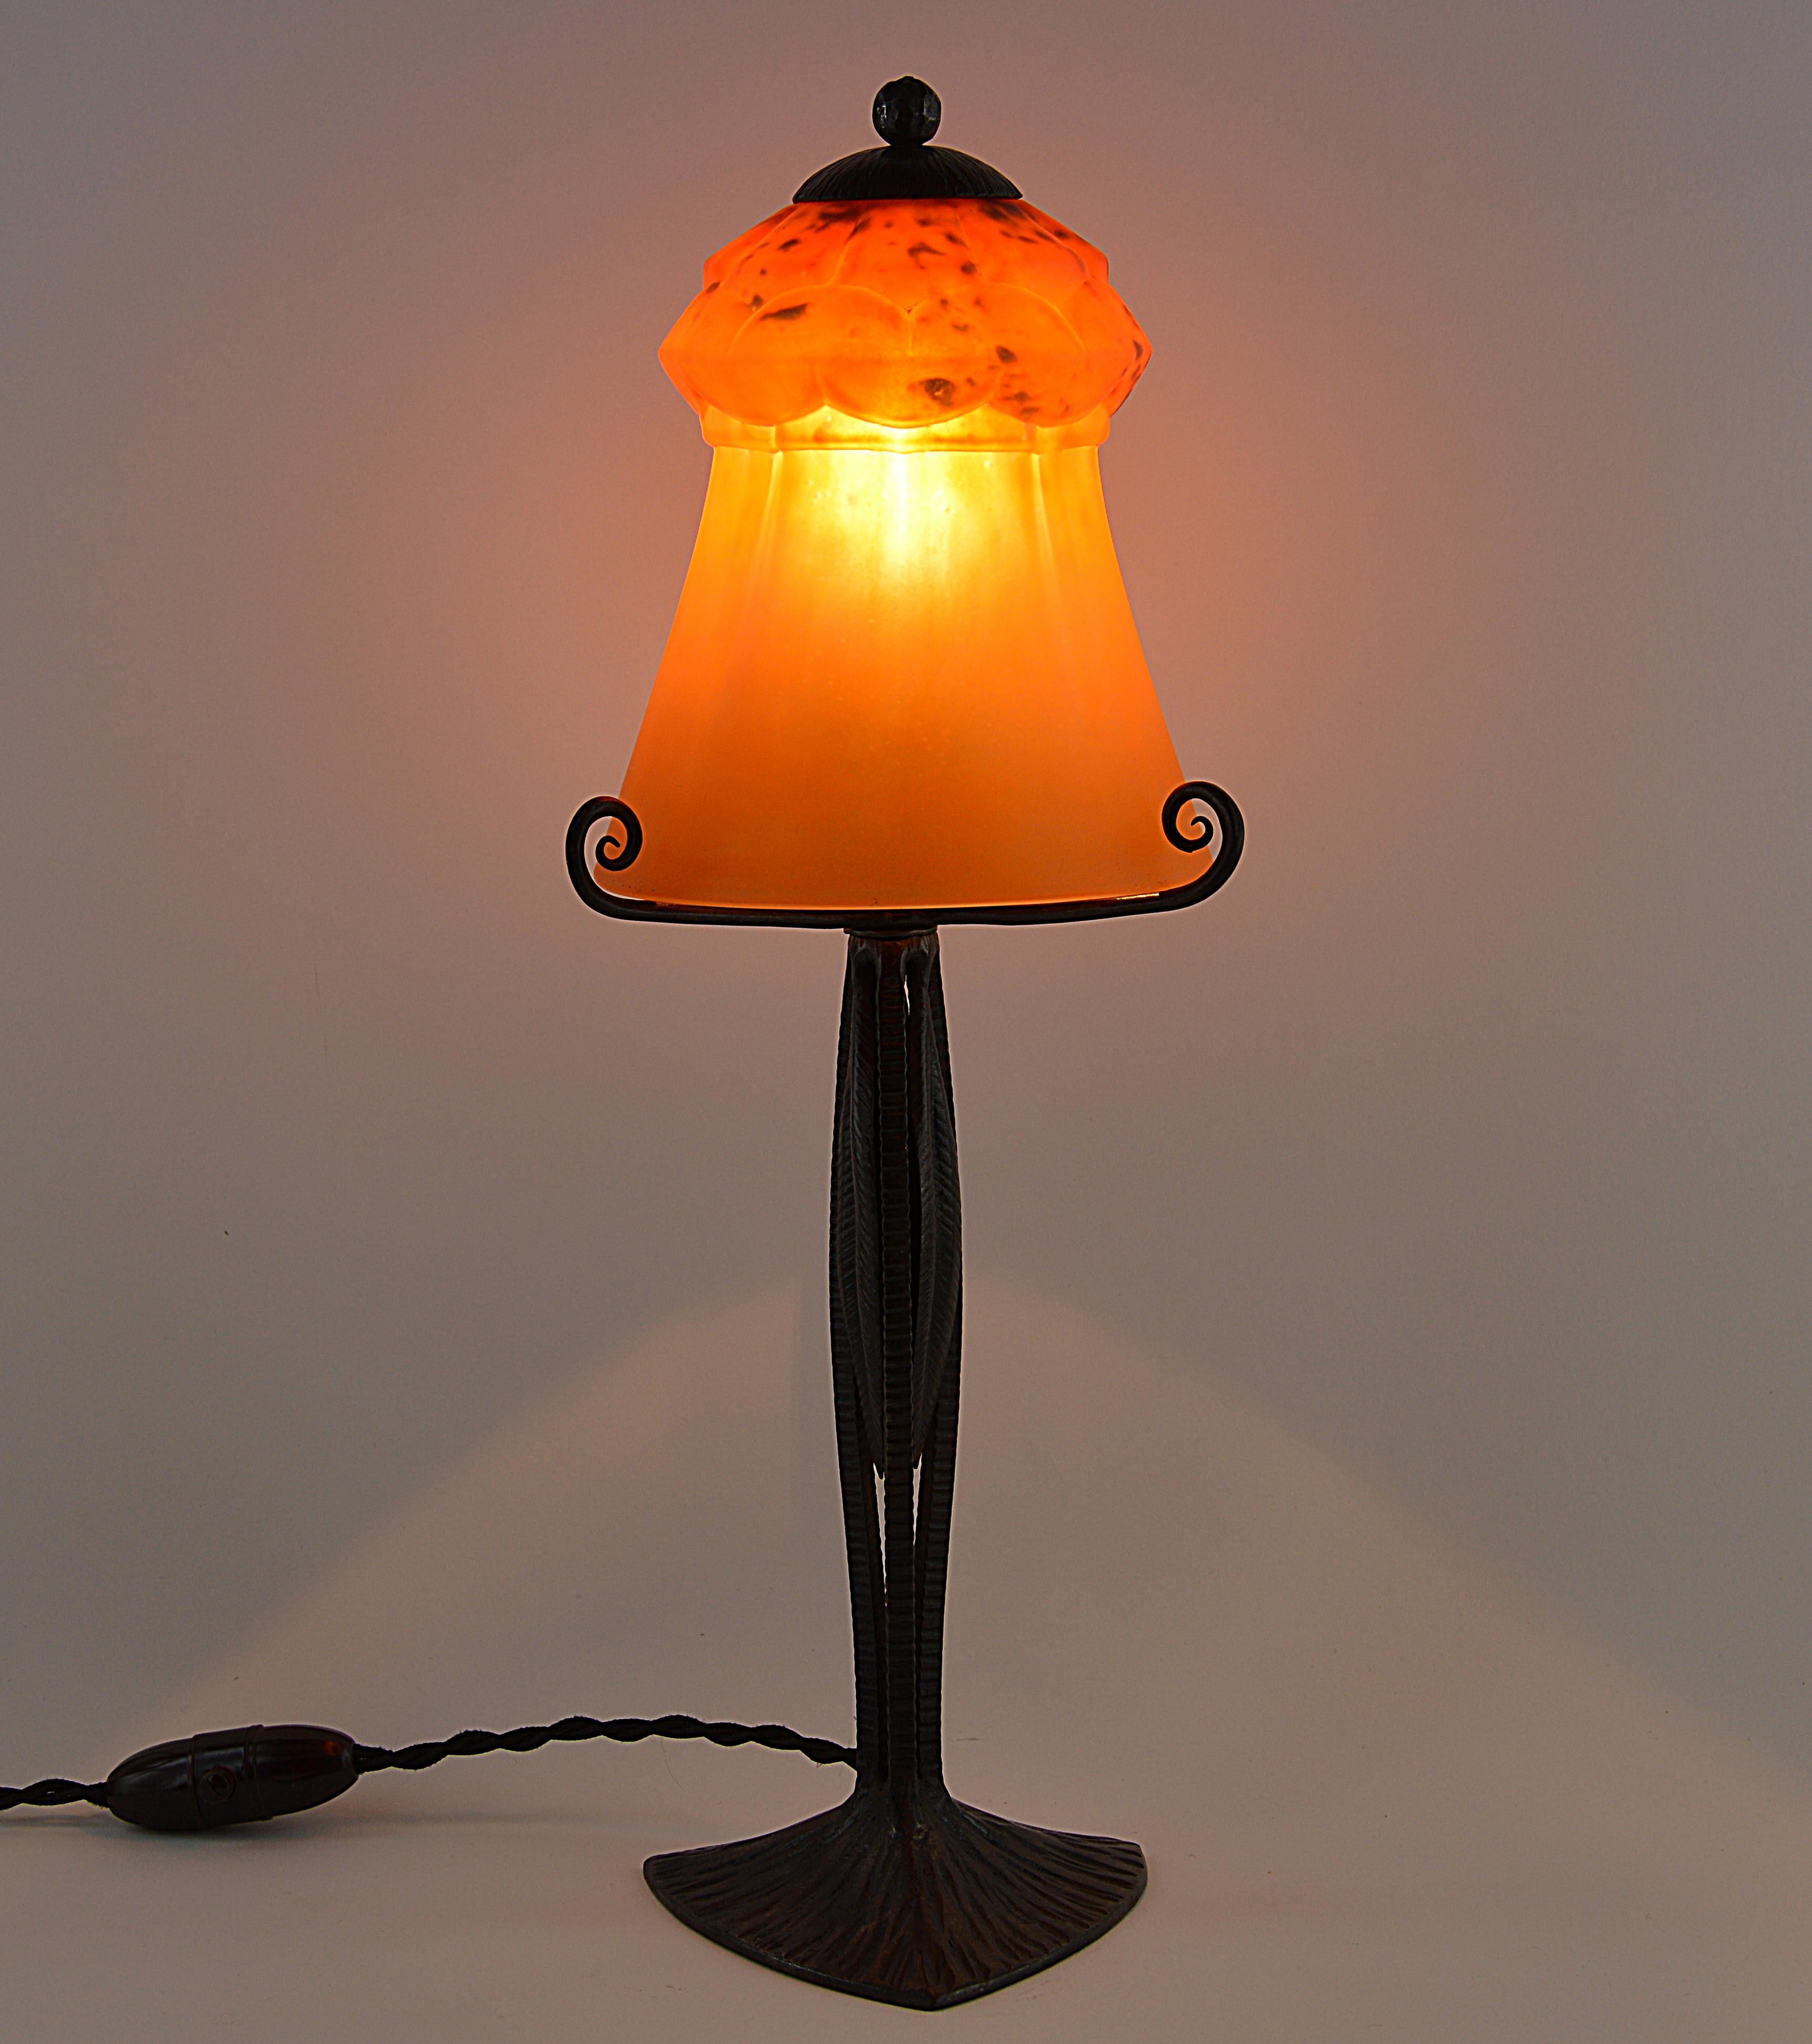 Of rare elegance. The perfect shape. Rare French Art Deco table lamp by Charles Schneider (Epinay-sur-Seine, Paris) and Henri Fournet (Lyon), France, circa 1925. This large blown molded glass shade made by Charles Schneider comes on its original